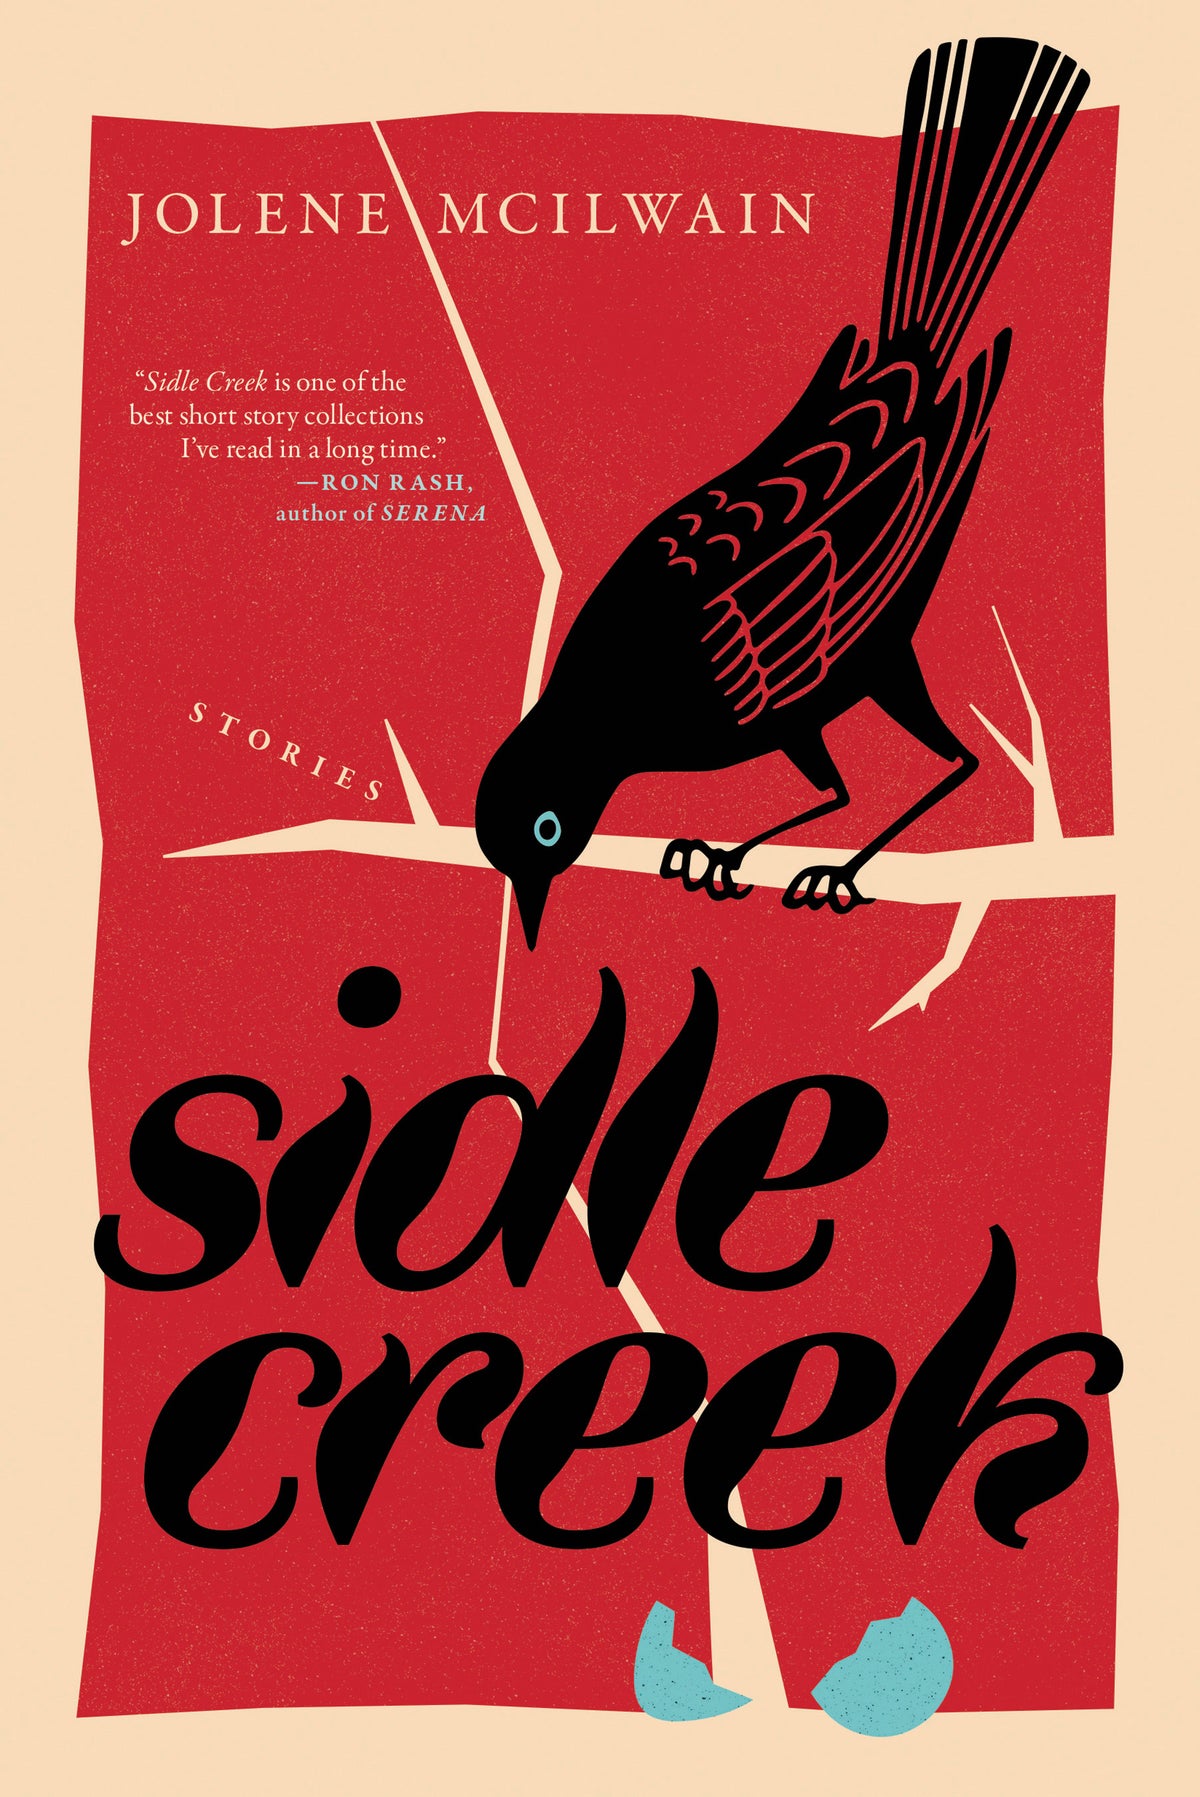 Book Review: A brilliant new story collection by Jolene McIlwain awaits in 'Sidle Creek'